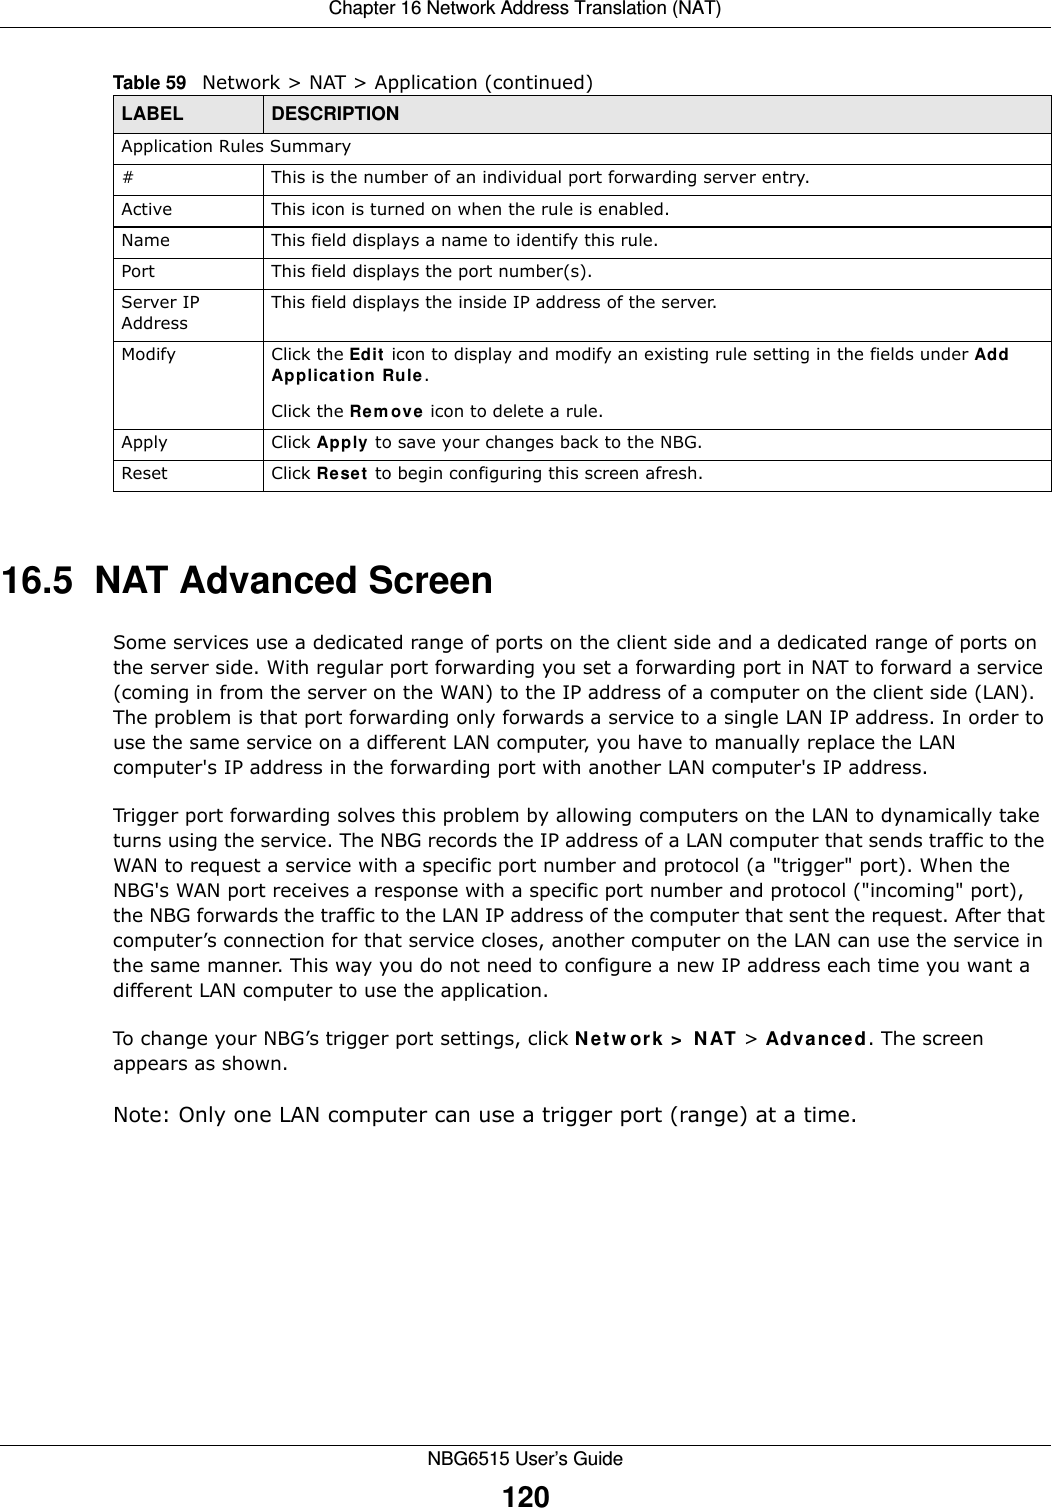 Chapter 16 Network Address Translation (NAT)NBG6515 User’s Guide12016.5  NAT Advanced ScreenSome services use a dedicated range of ports on the client side and a dedicated range of ports on the server side. With regular port forwarding you set a forwarding port in NAT to forward a service (coming in from the server on the WAN) to the IP address of a computer on the client side (LAN). The problem is that port forwarding only forwards a service to a single LAN IP address. In order to use the same service on a different LAN computer, you have to manually replace the LAN computer&apos;s IP address in the forwarding port with another LAN computer&apos;s IP address. Trigger port forwarding solves this problem by allowing computers on the LAN to dynamically take turns using the service. The NBG records the IP address of a LAN computer that sends traffic to the WAN to request a service with a specific port number and protocol (a &quot;trigger&quot; port). When the NBG&apos;s WAN port receives a response with a specific port number and protocol (&quot;incoming&quot; port), the NBG forwards the traffic to the LAN IP address of the computer that sent the request. After that computer’s connection for that service closes, another computer on the LAN can use the service in the same manner. This way you do not need to configure a new IP address each time you want a different LAN computer to use the application.To change your NBG’s trigger port settings, click Network &gt; NAT &gt; Advanced. The screen appears as shown.Note: Only one LAN computer can use a trigger port (range) at a time.Application Rules Summary#This is the number of an individual port forwarding server entry.Active This icon is turned on when the rule is enabled. Name This field displays a name to identify this rule.Port This field displays the port number(s). Server IP AddressThis field displays the inside IP address of the server.Modify Click the Edit icon to display and modify an existing rule setting in the fields under Add Application Rule. Click the Remove icon to delete a rule.Apply Click Apply to save your changes back to the NBG.Reset Click Reset to begin configuring this screen afresh.Table 59   Network &gt; NAT &gt; Application (continued)LABEL DESCRIPTION